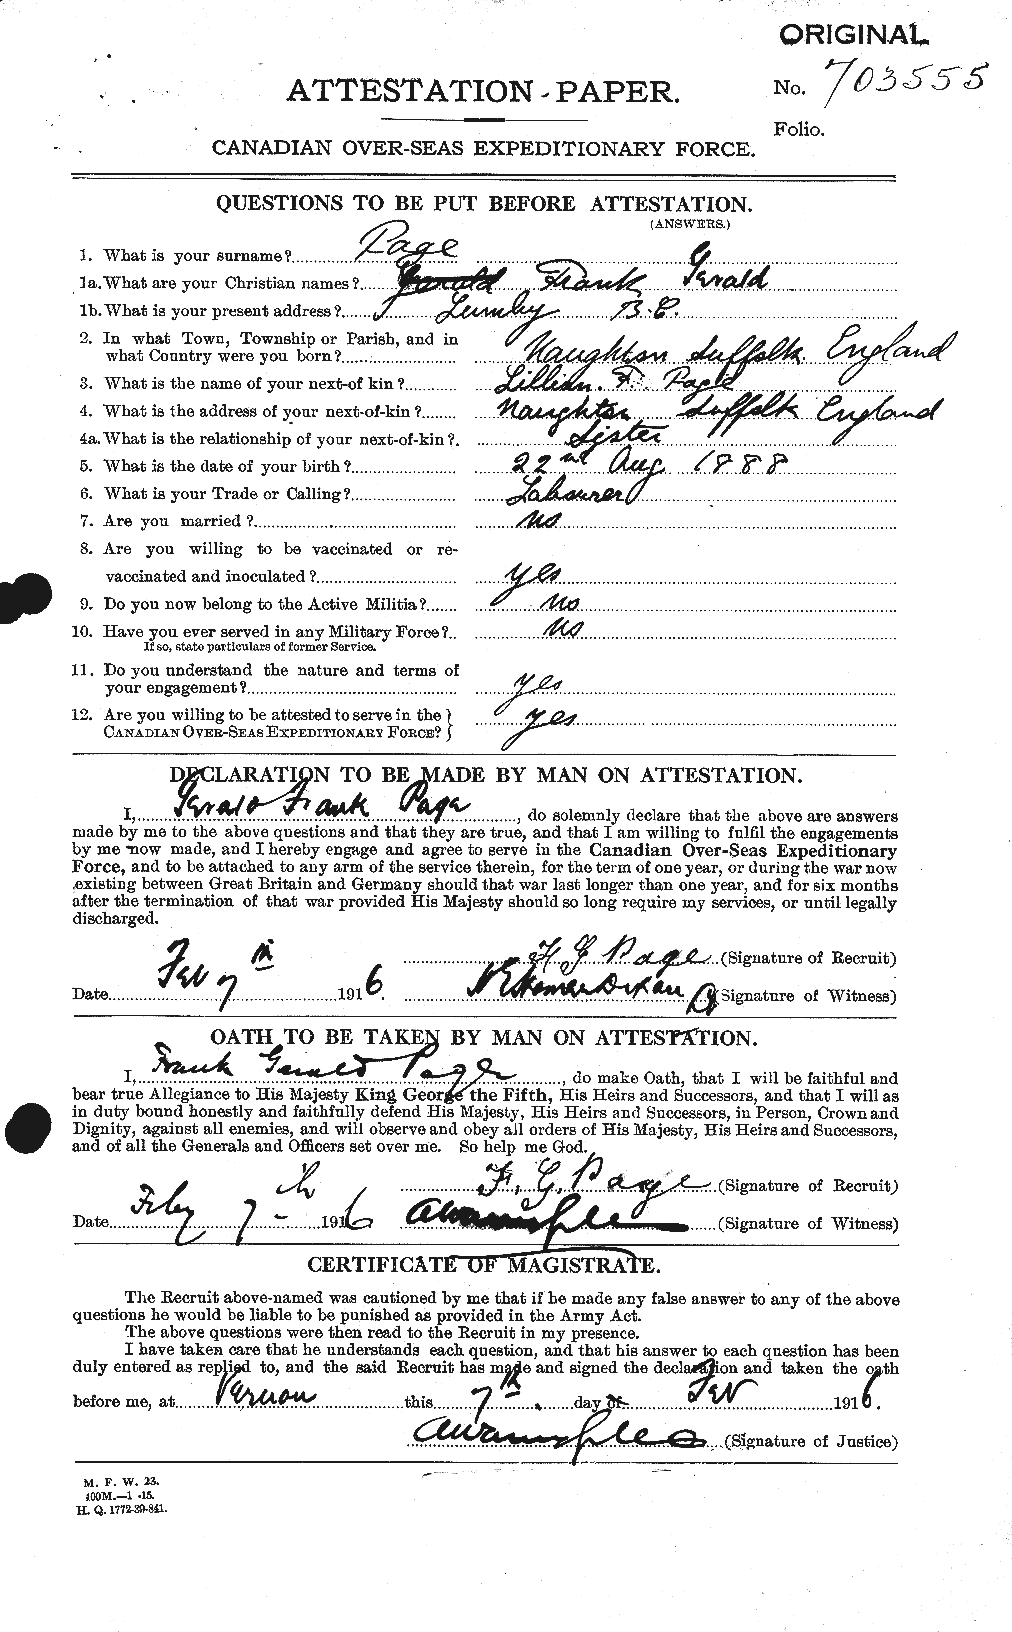 Personnel Records of the First World War - CEF 562069a